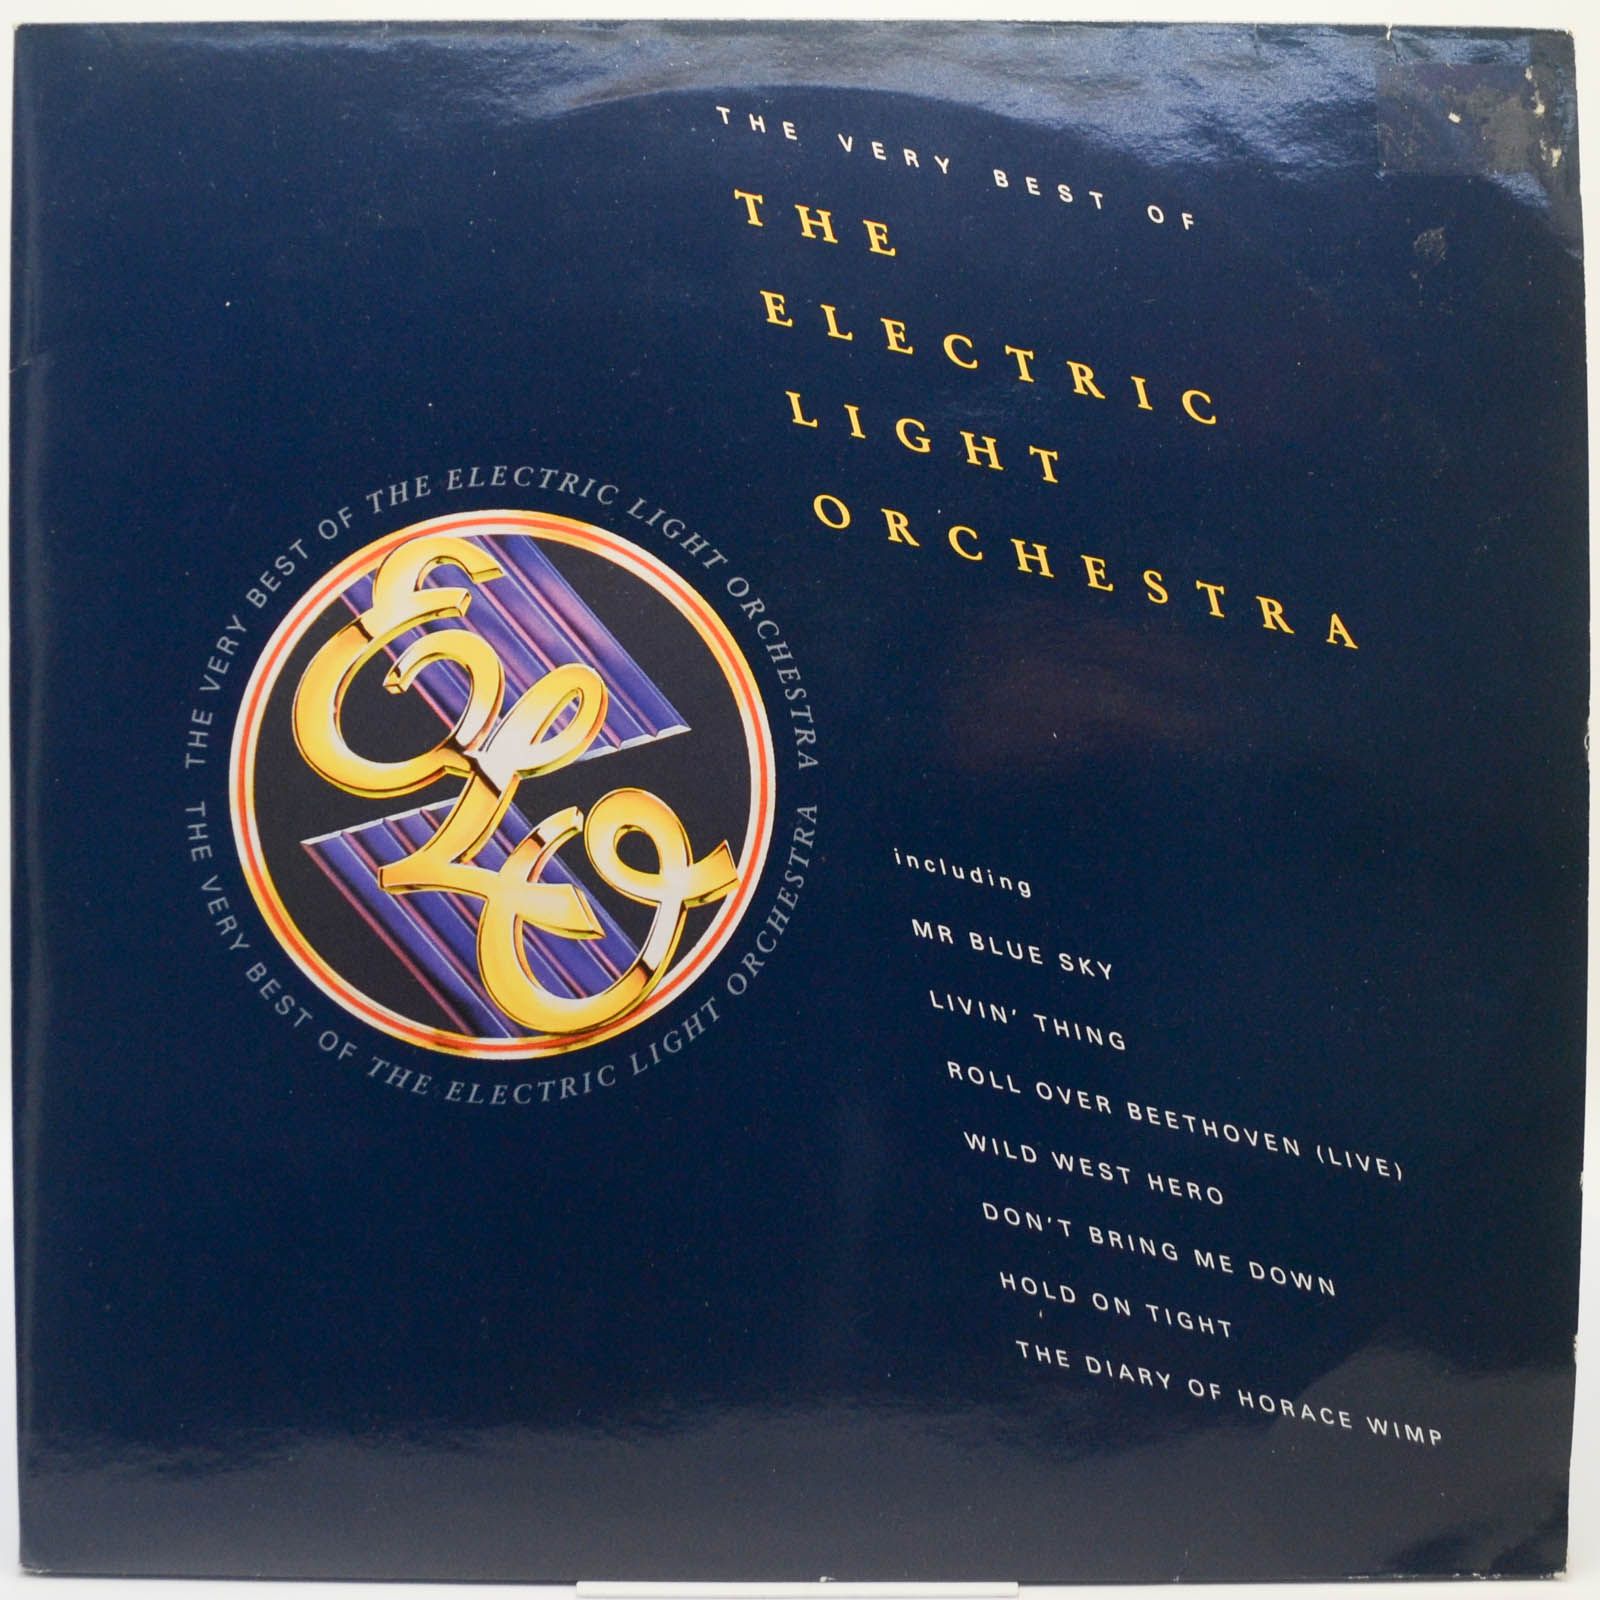 Electric Light Orchestra — The Very Best Of The Electric Light Orchestra (2LP, 1-st, UK), 1989